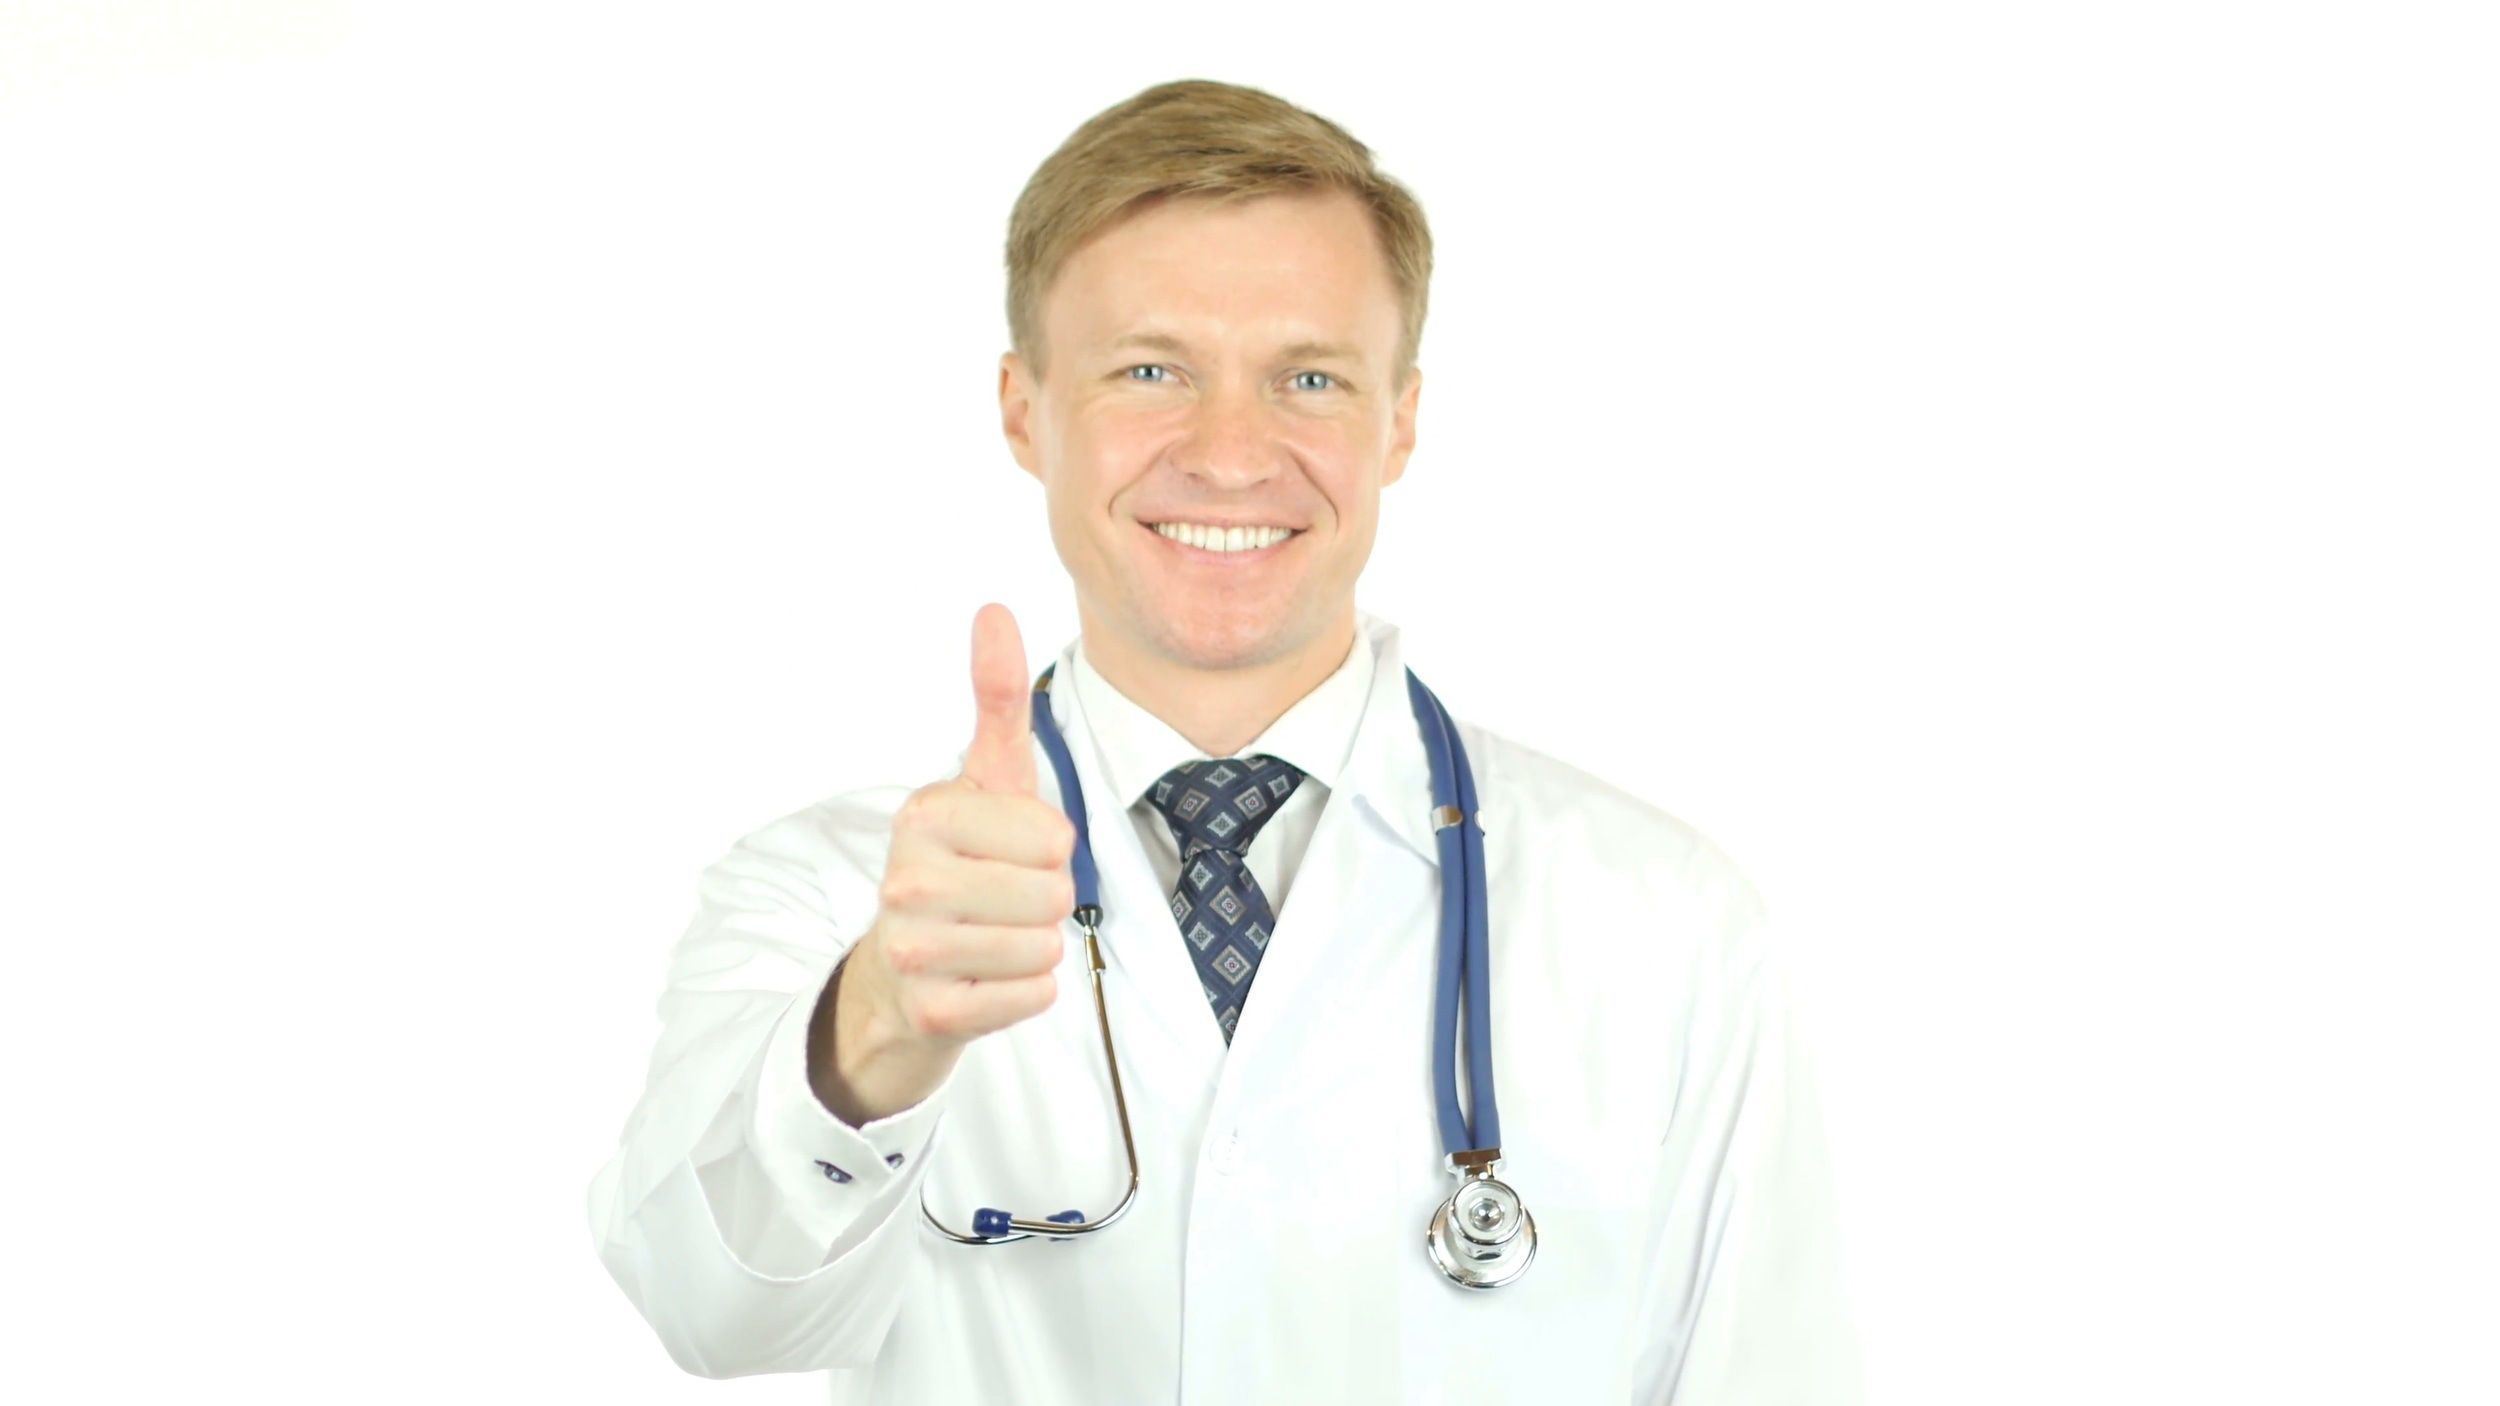 smiling-doctor-showing-thumbs-up-gesture-of-success-on-white-background_rkhyv-md__F0006.png